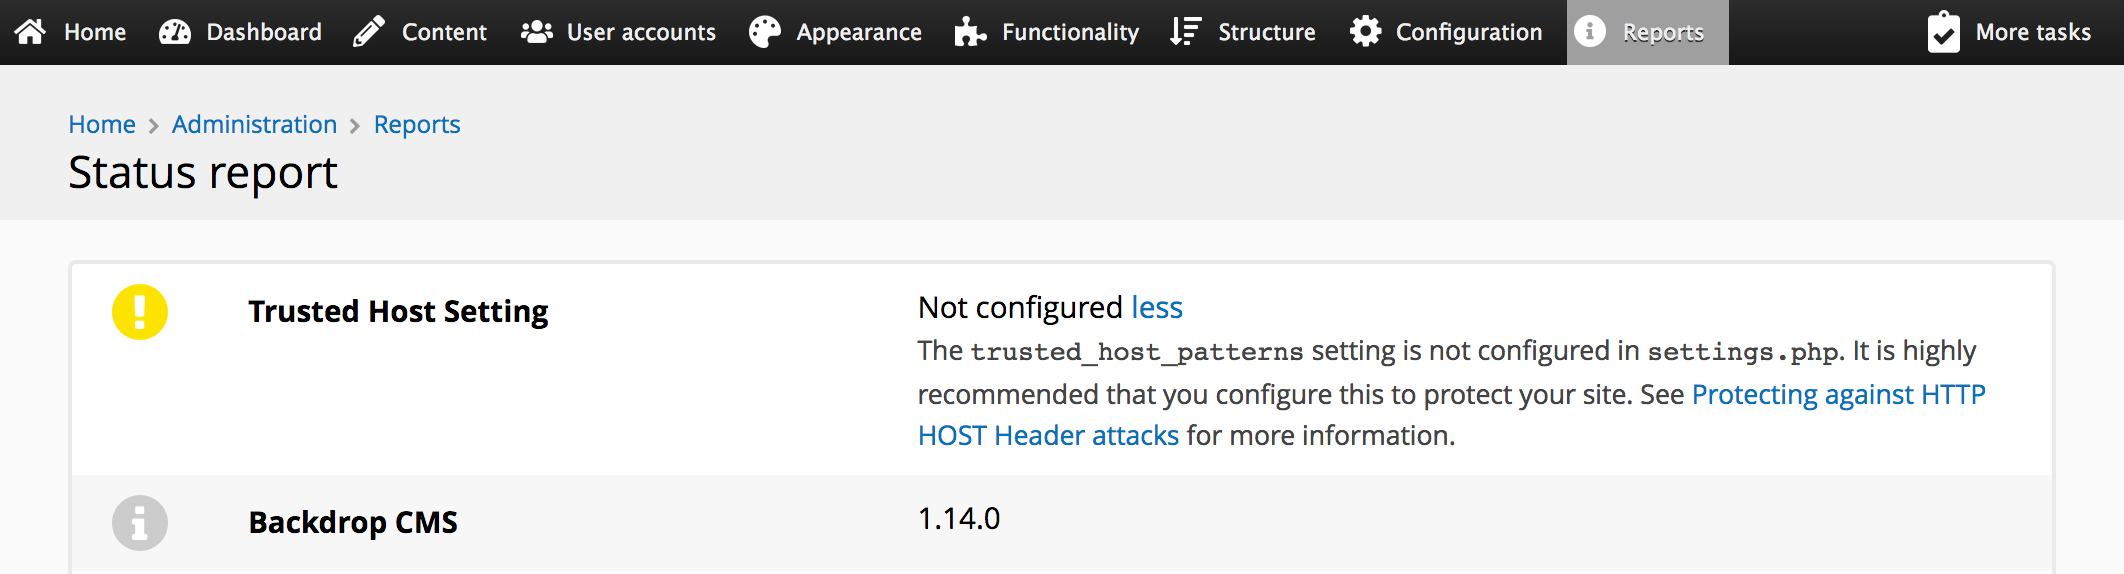 Screenshot of the status report showing the new trusted host patterns setting.